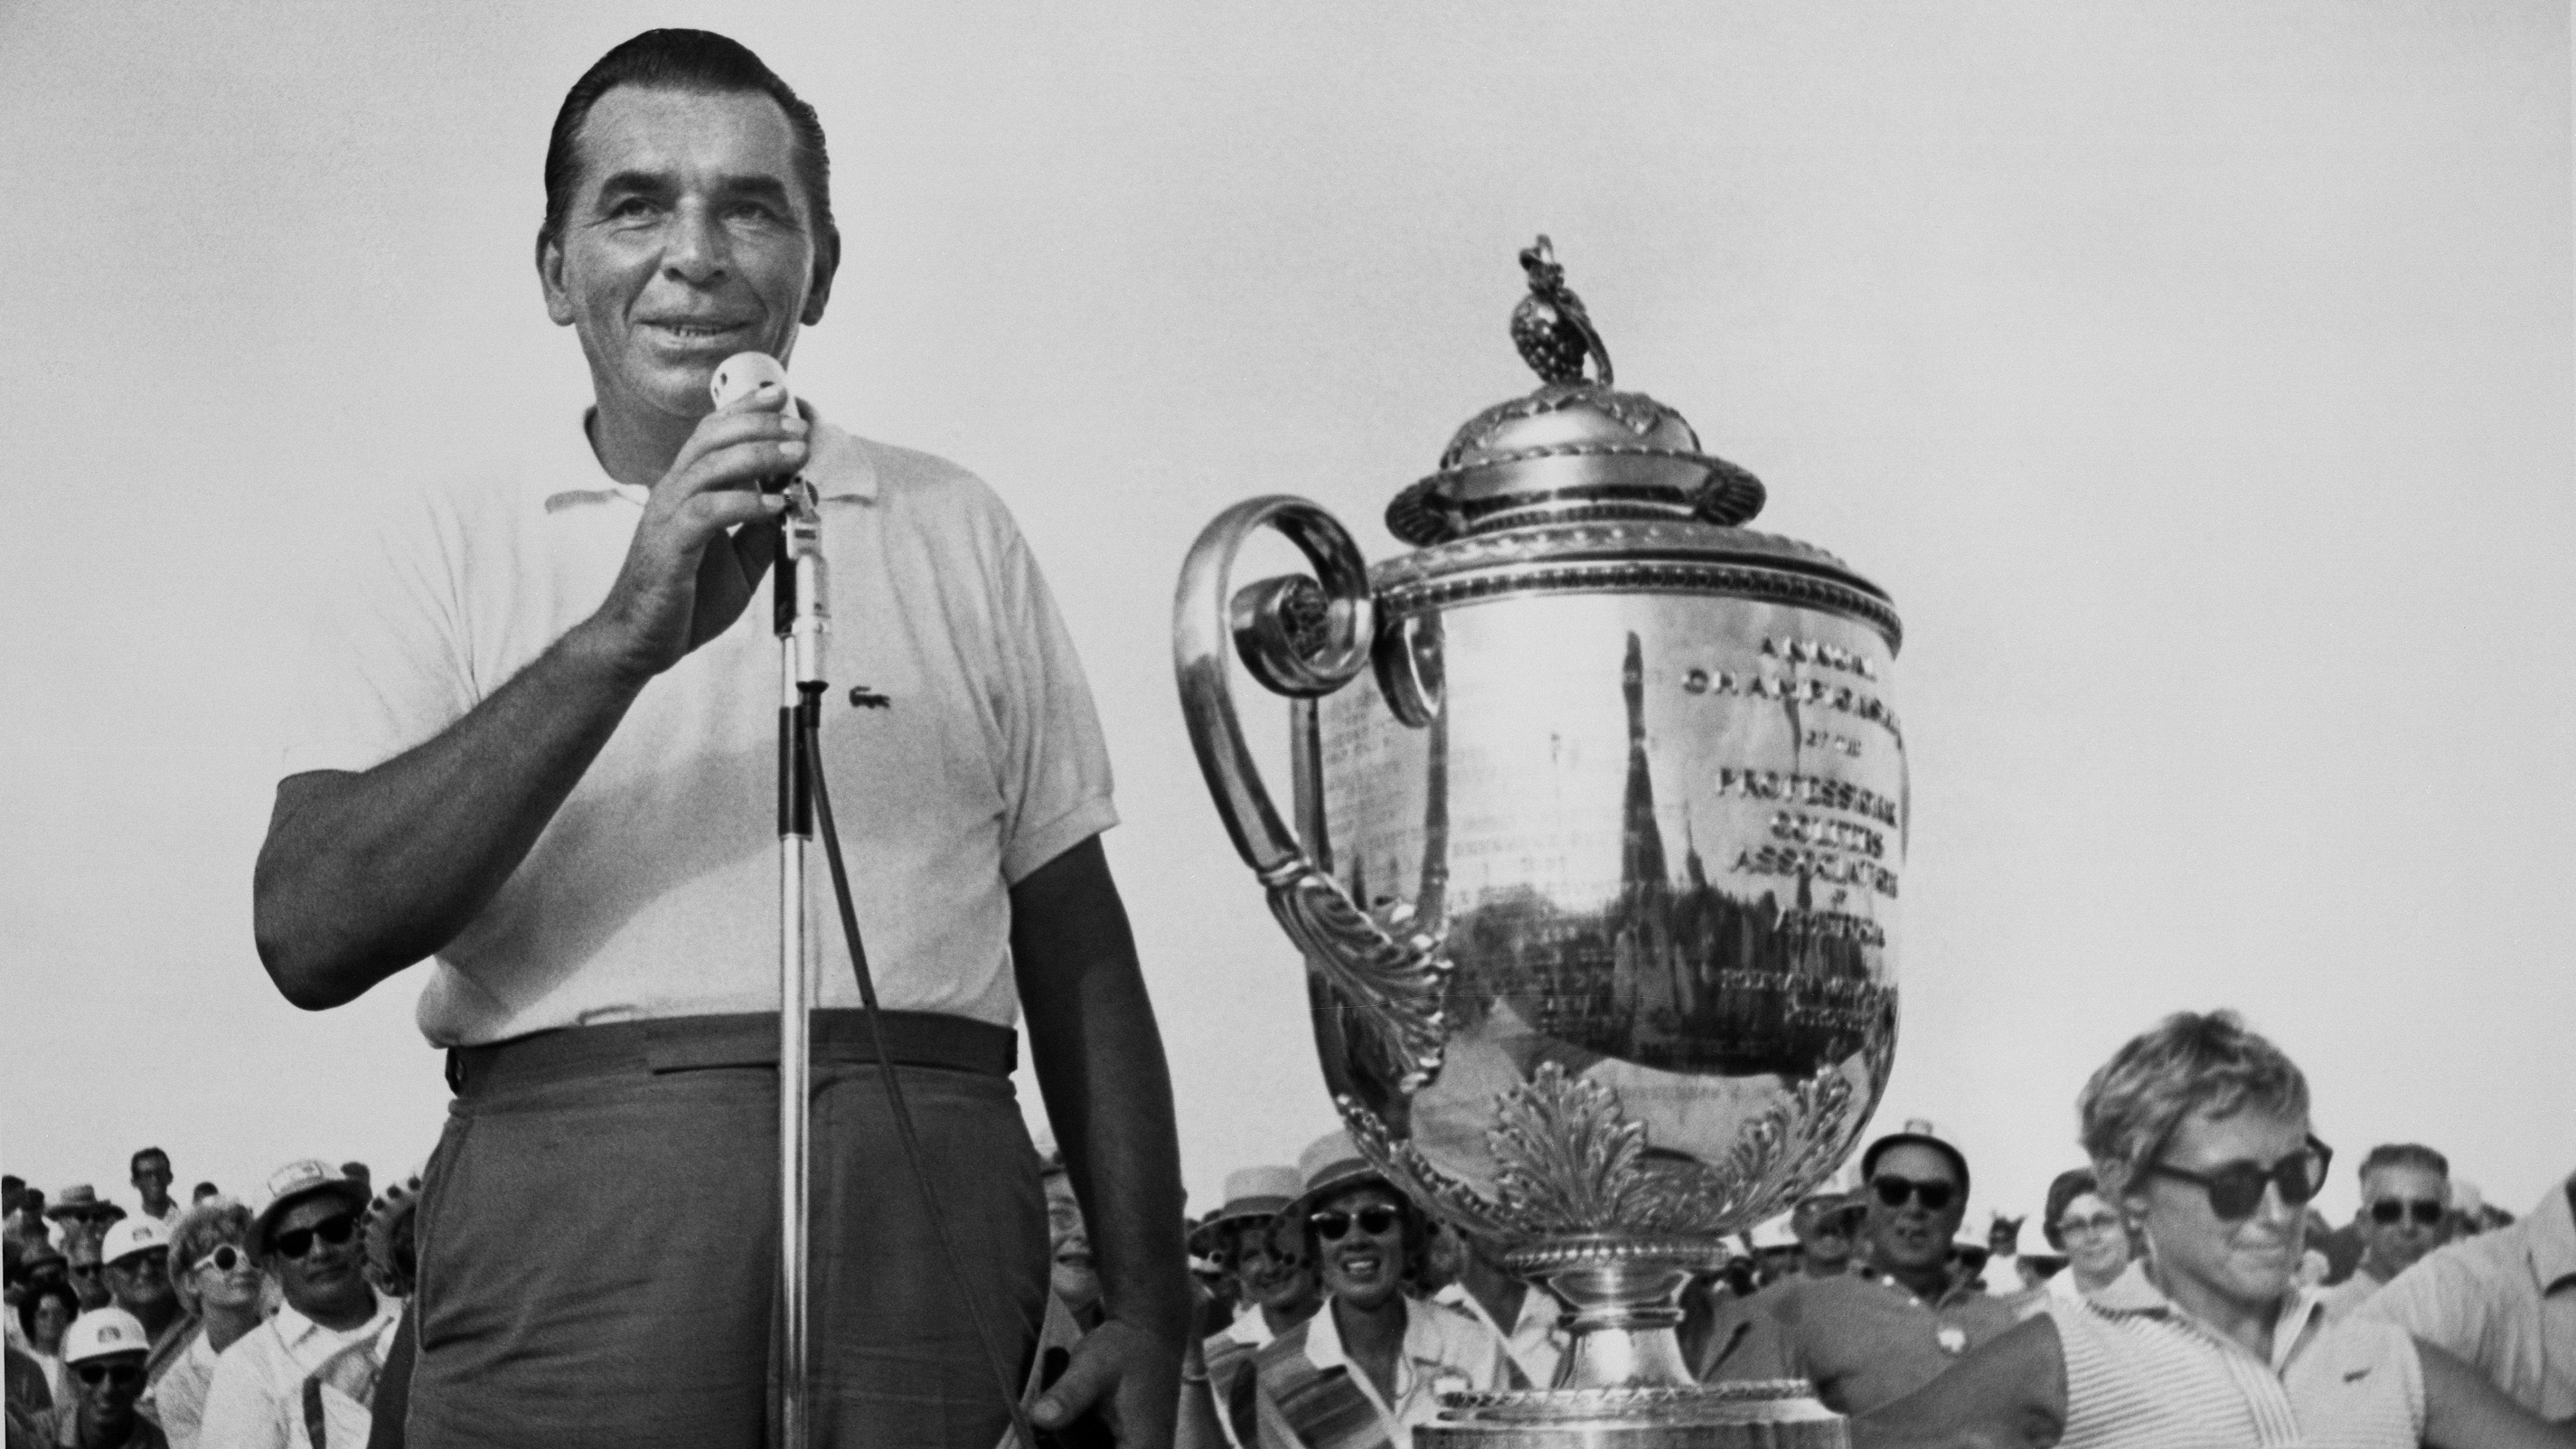 5 oldest players to win the PGA Championship